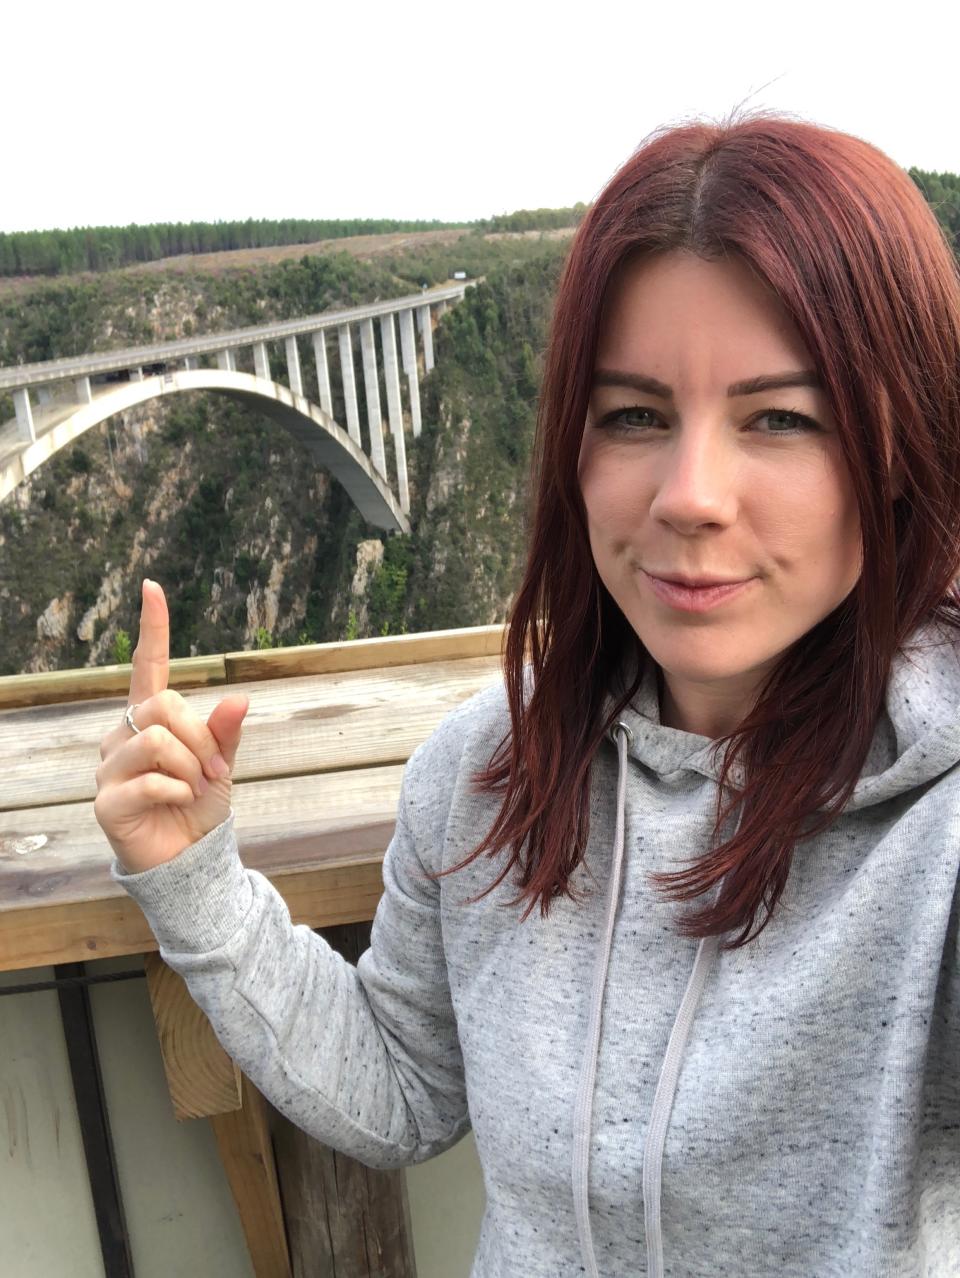 Lifestyle reporter Bex braved the world’s biggest bridge bungee. Scary stuff. Source: Yahoo Lifestyle